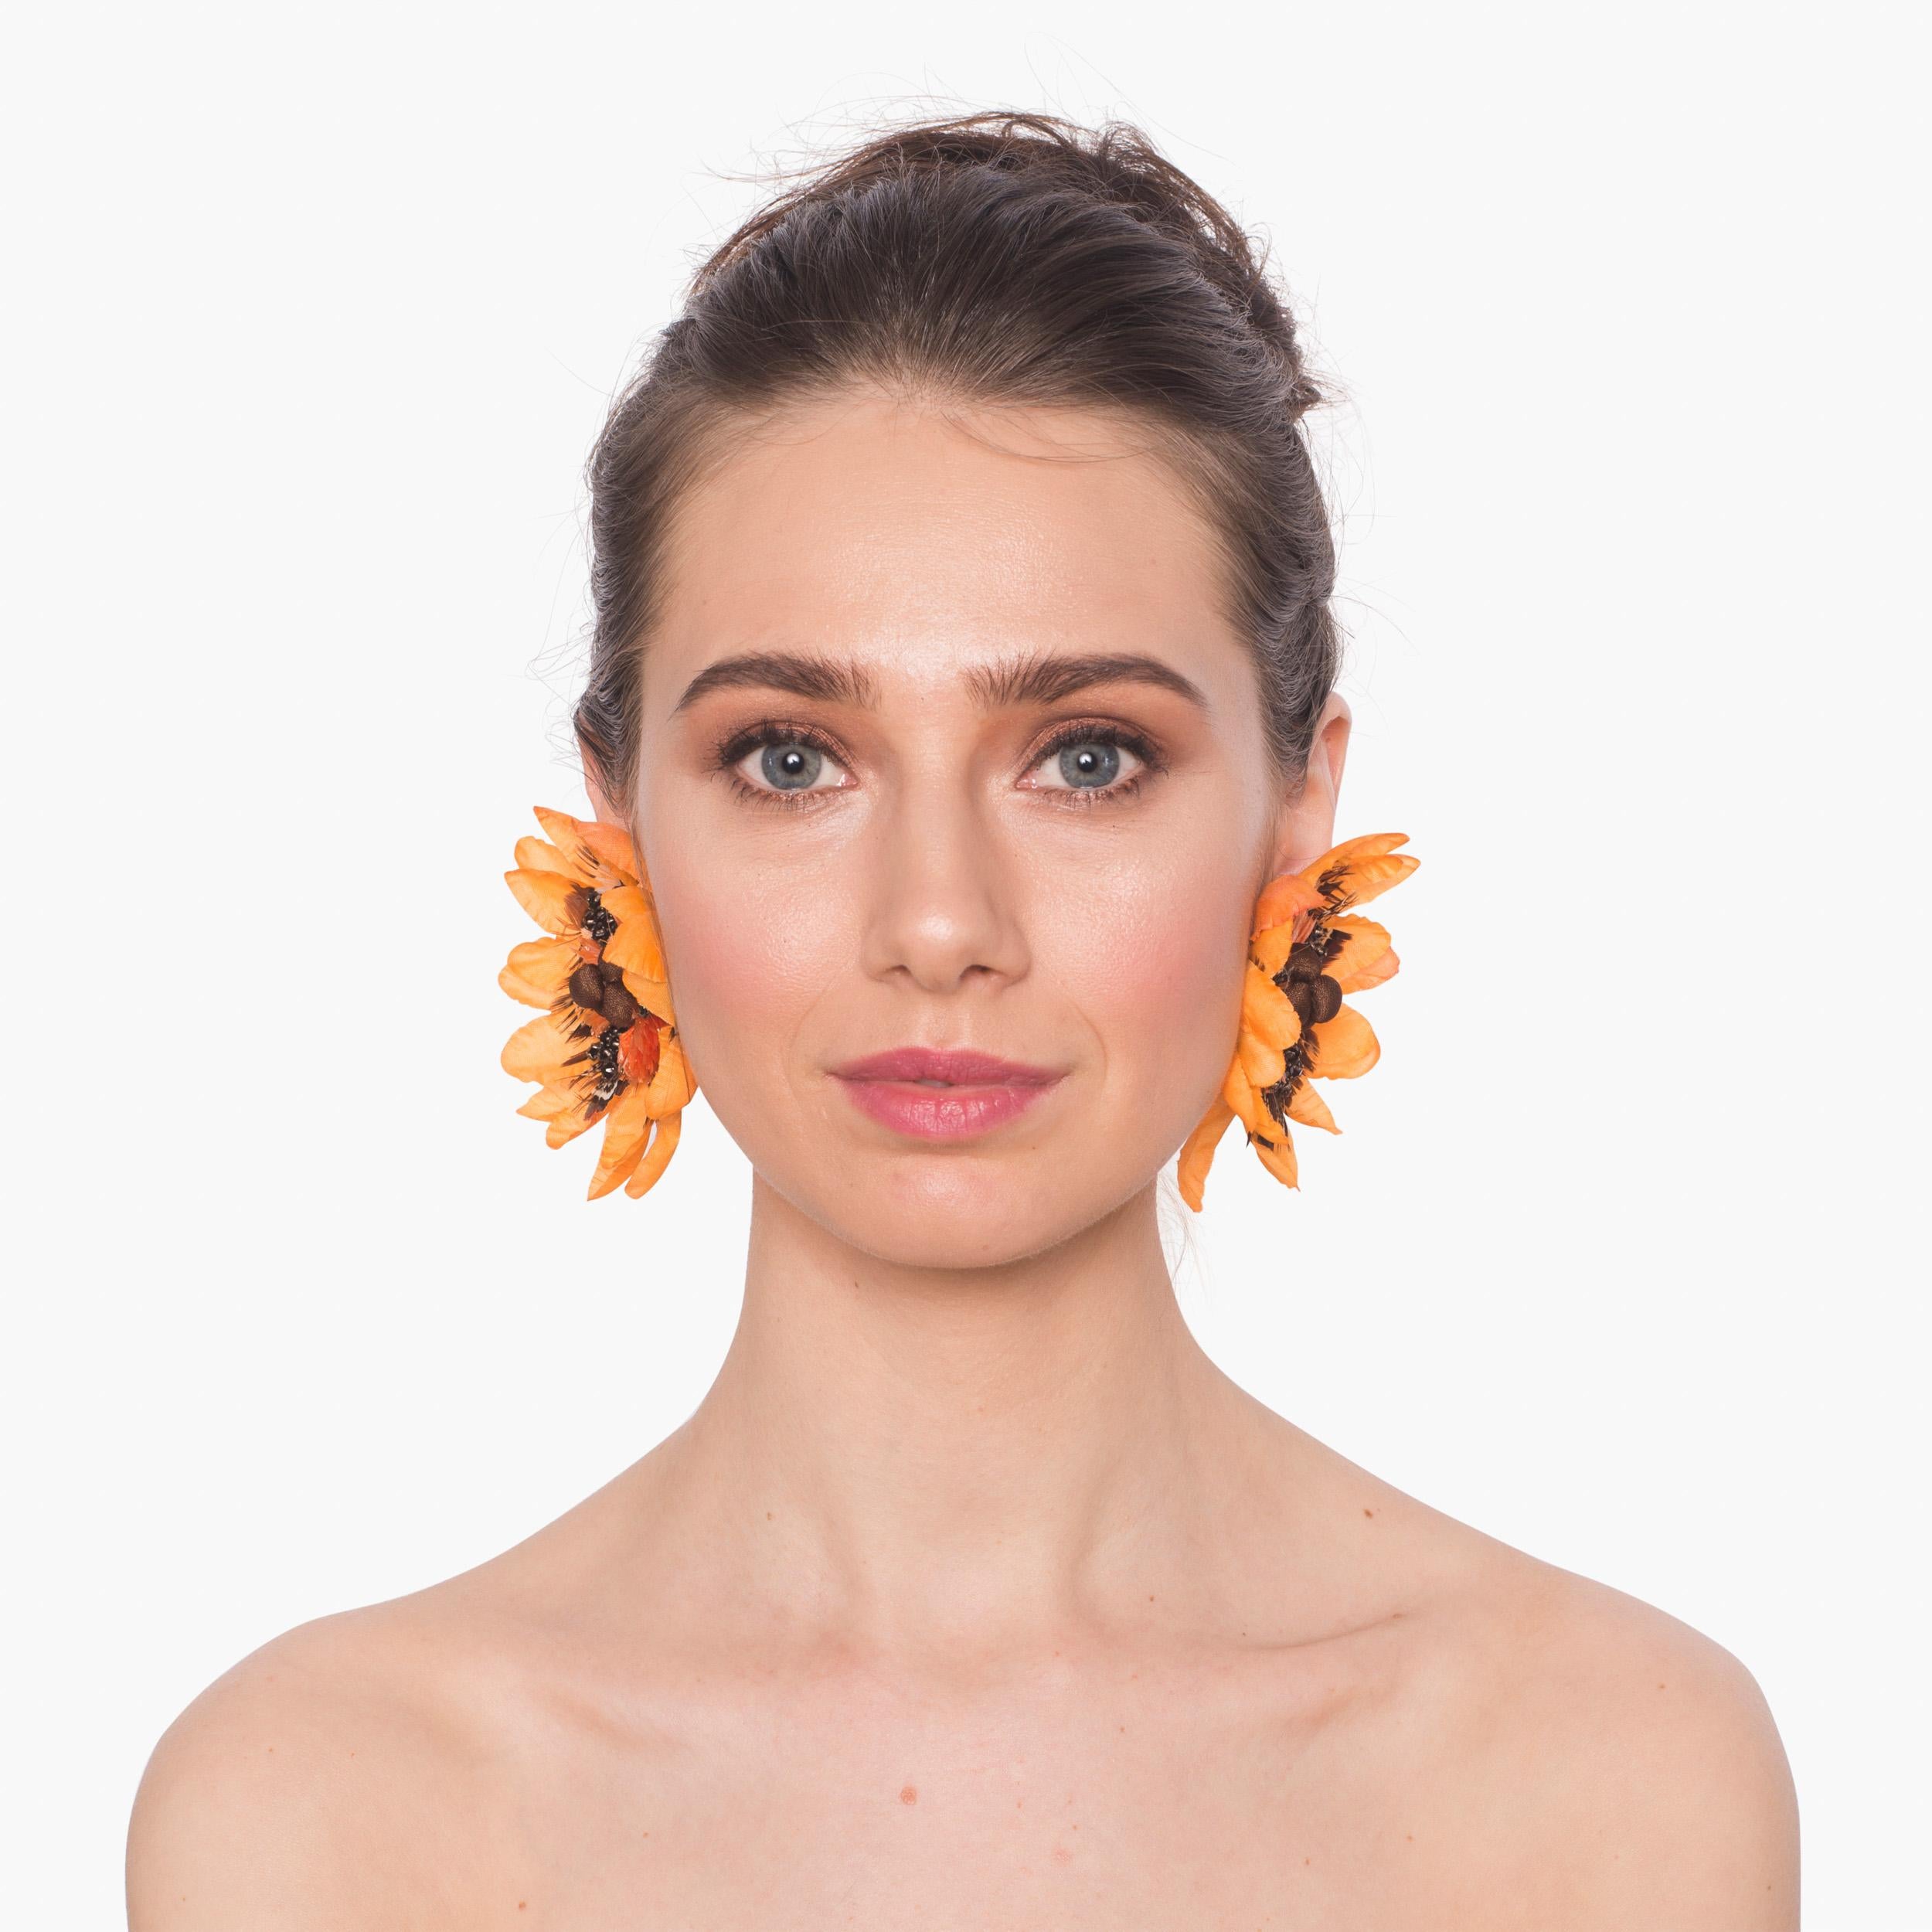 Add an element of liveliness to your look with the Begonia earring. Bright orange silk petals, pheasant feathers, and crystals make Begonia a pop of color for any wardrobe.